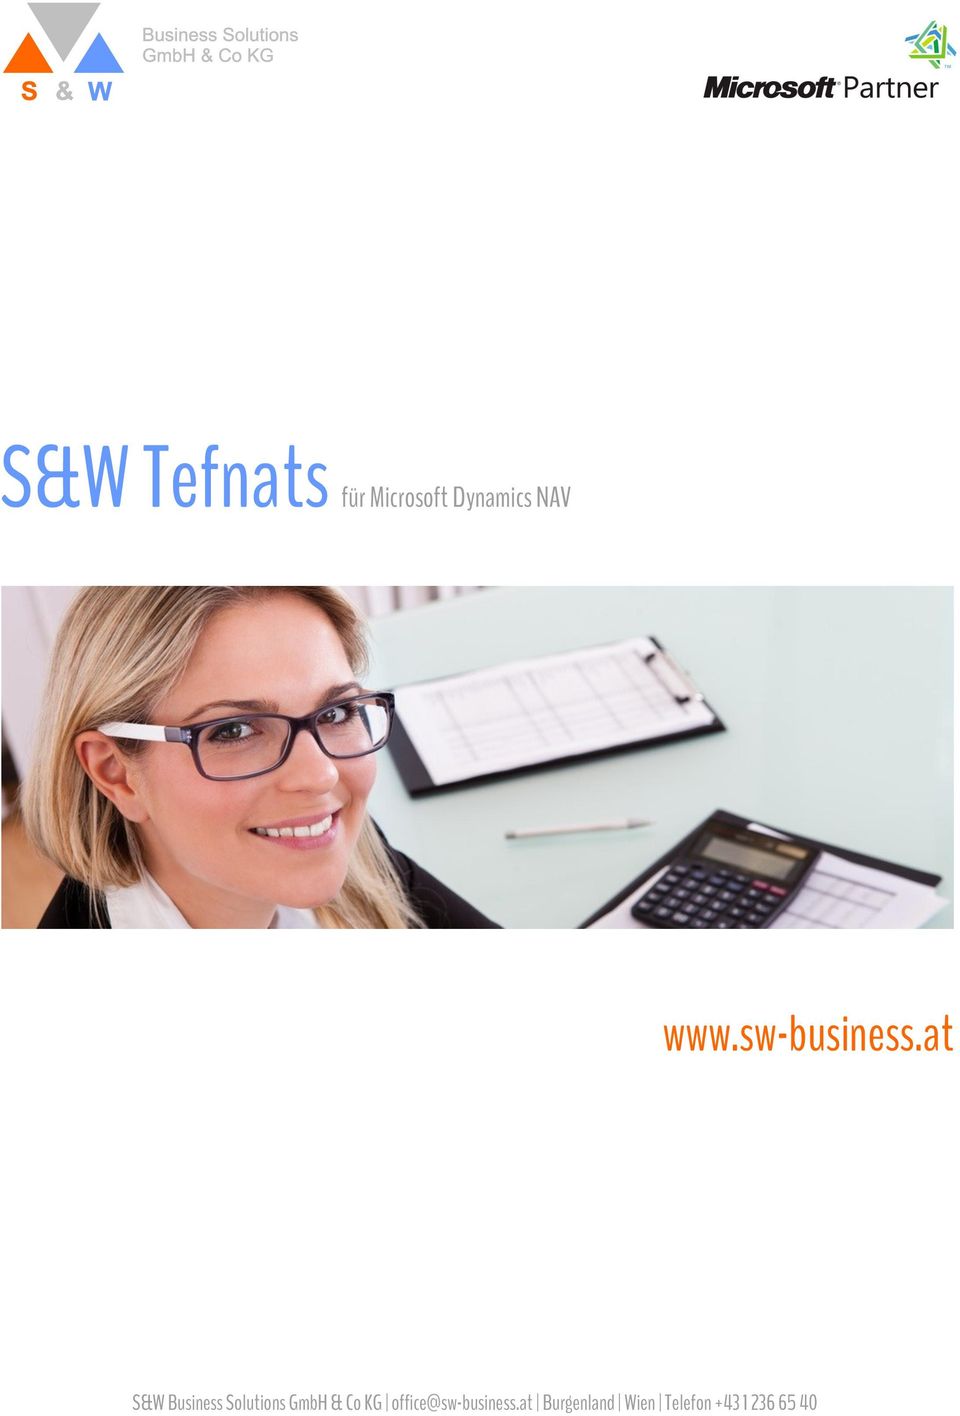 at S&W Business Solutions GmbH & Co KG